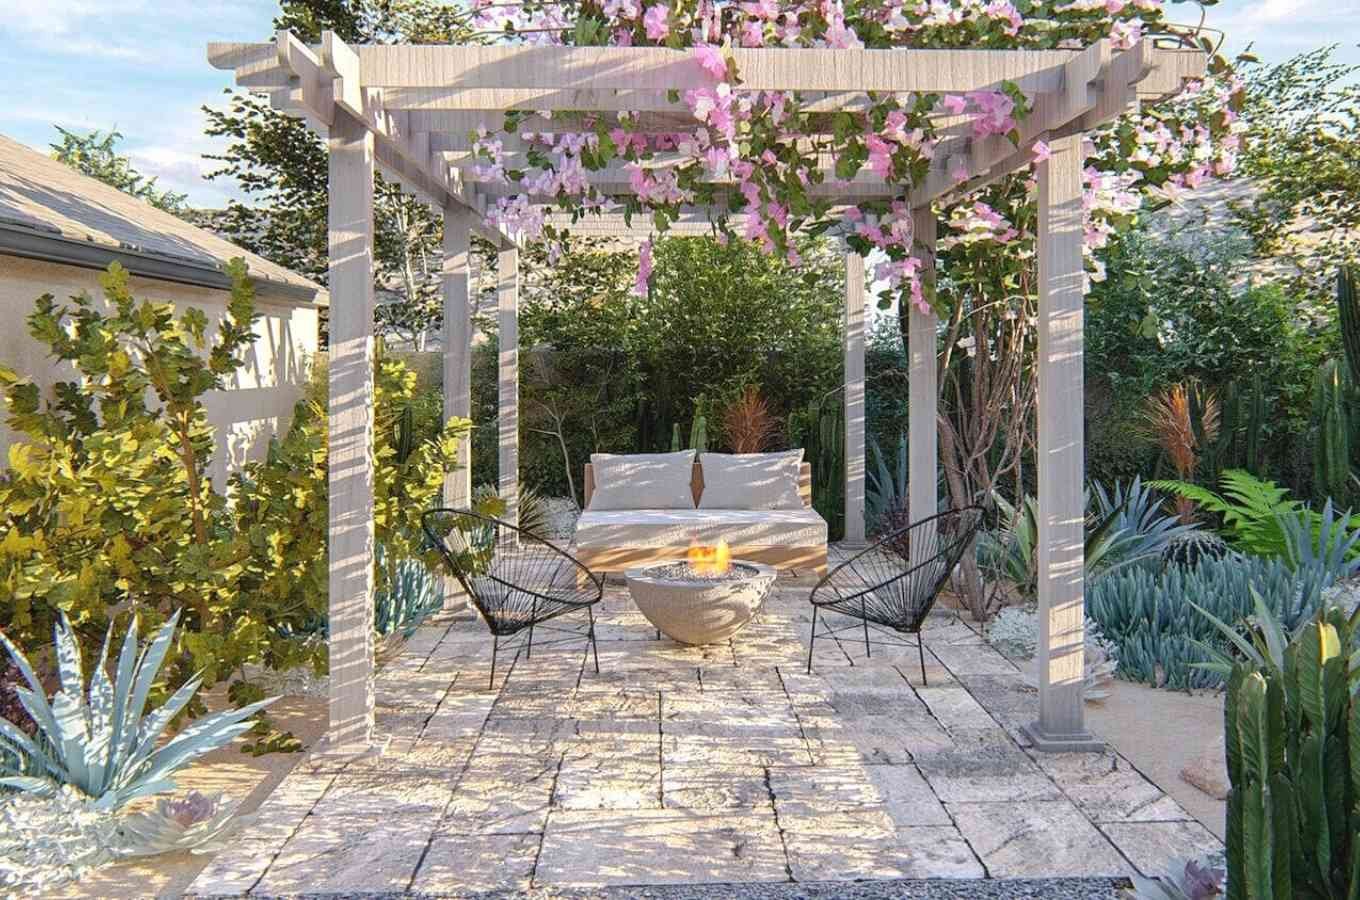 Concrete backyard, decorated pergola over sitting area, fire pit, lots of low water plants.